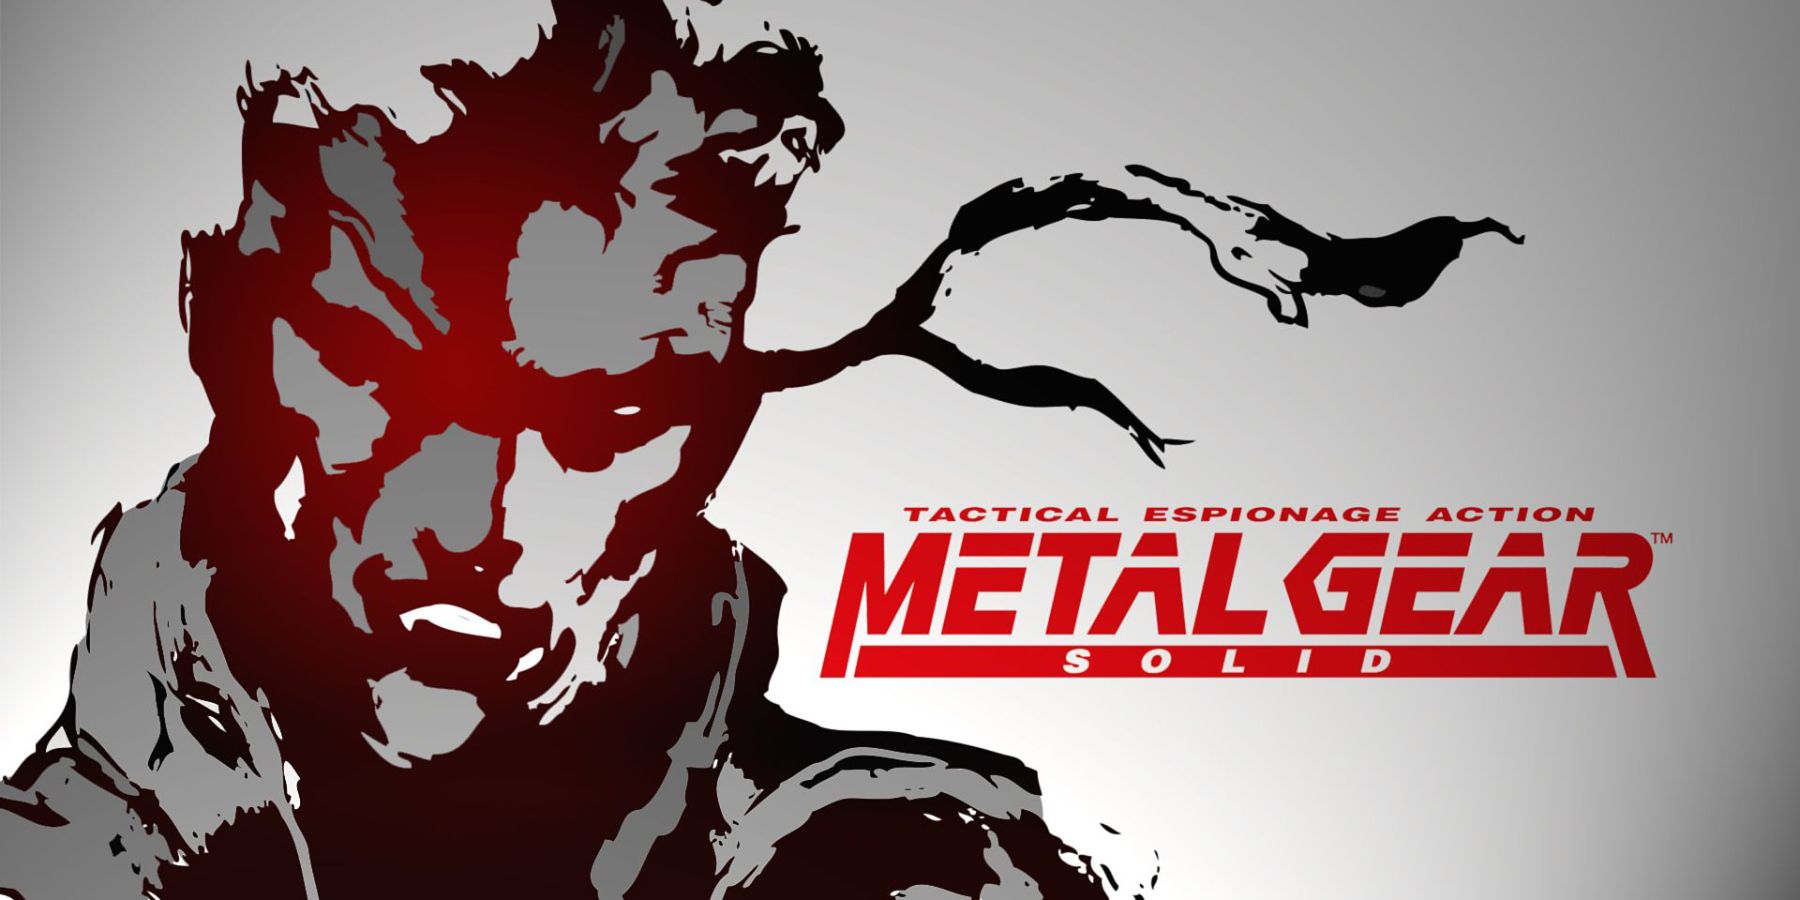 Solid snake logo with metal gears